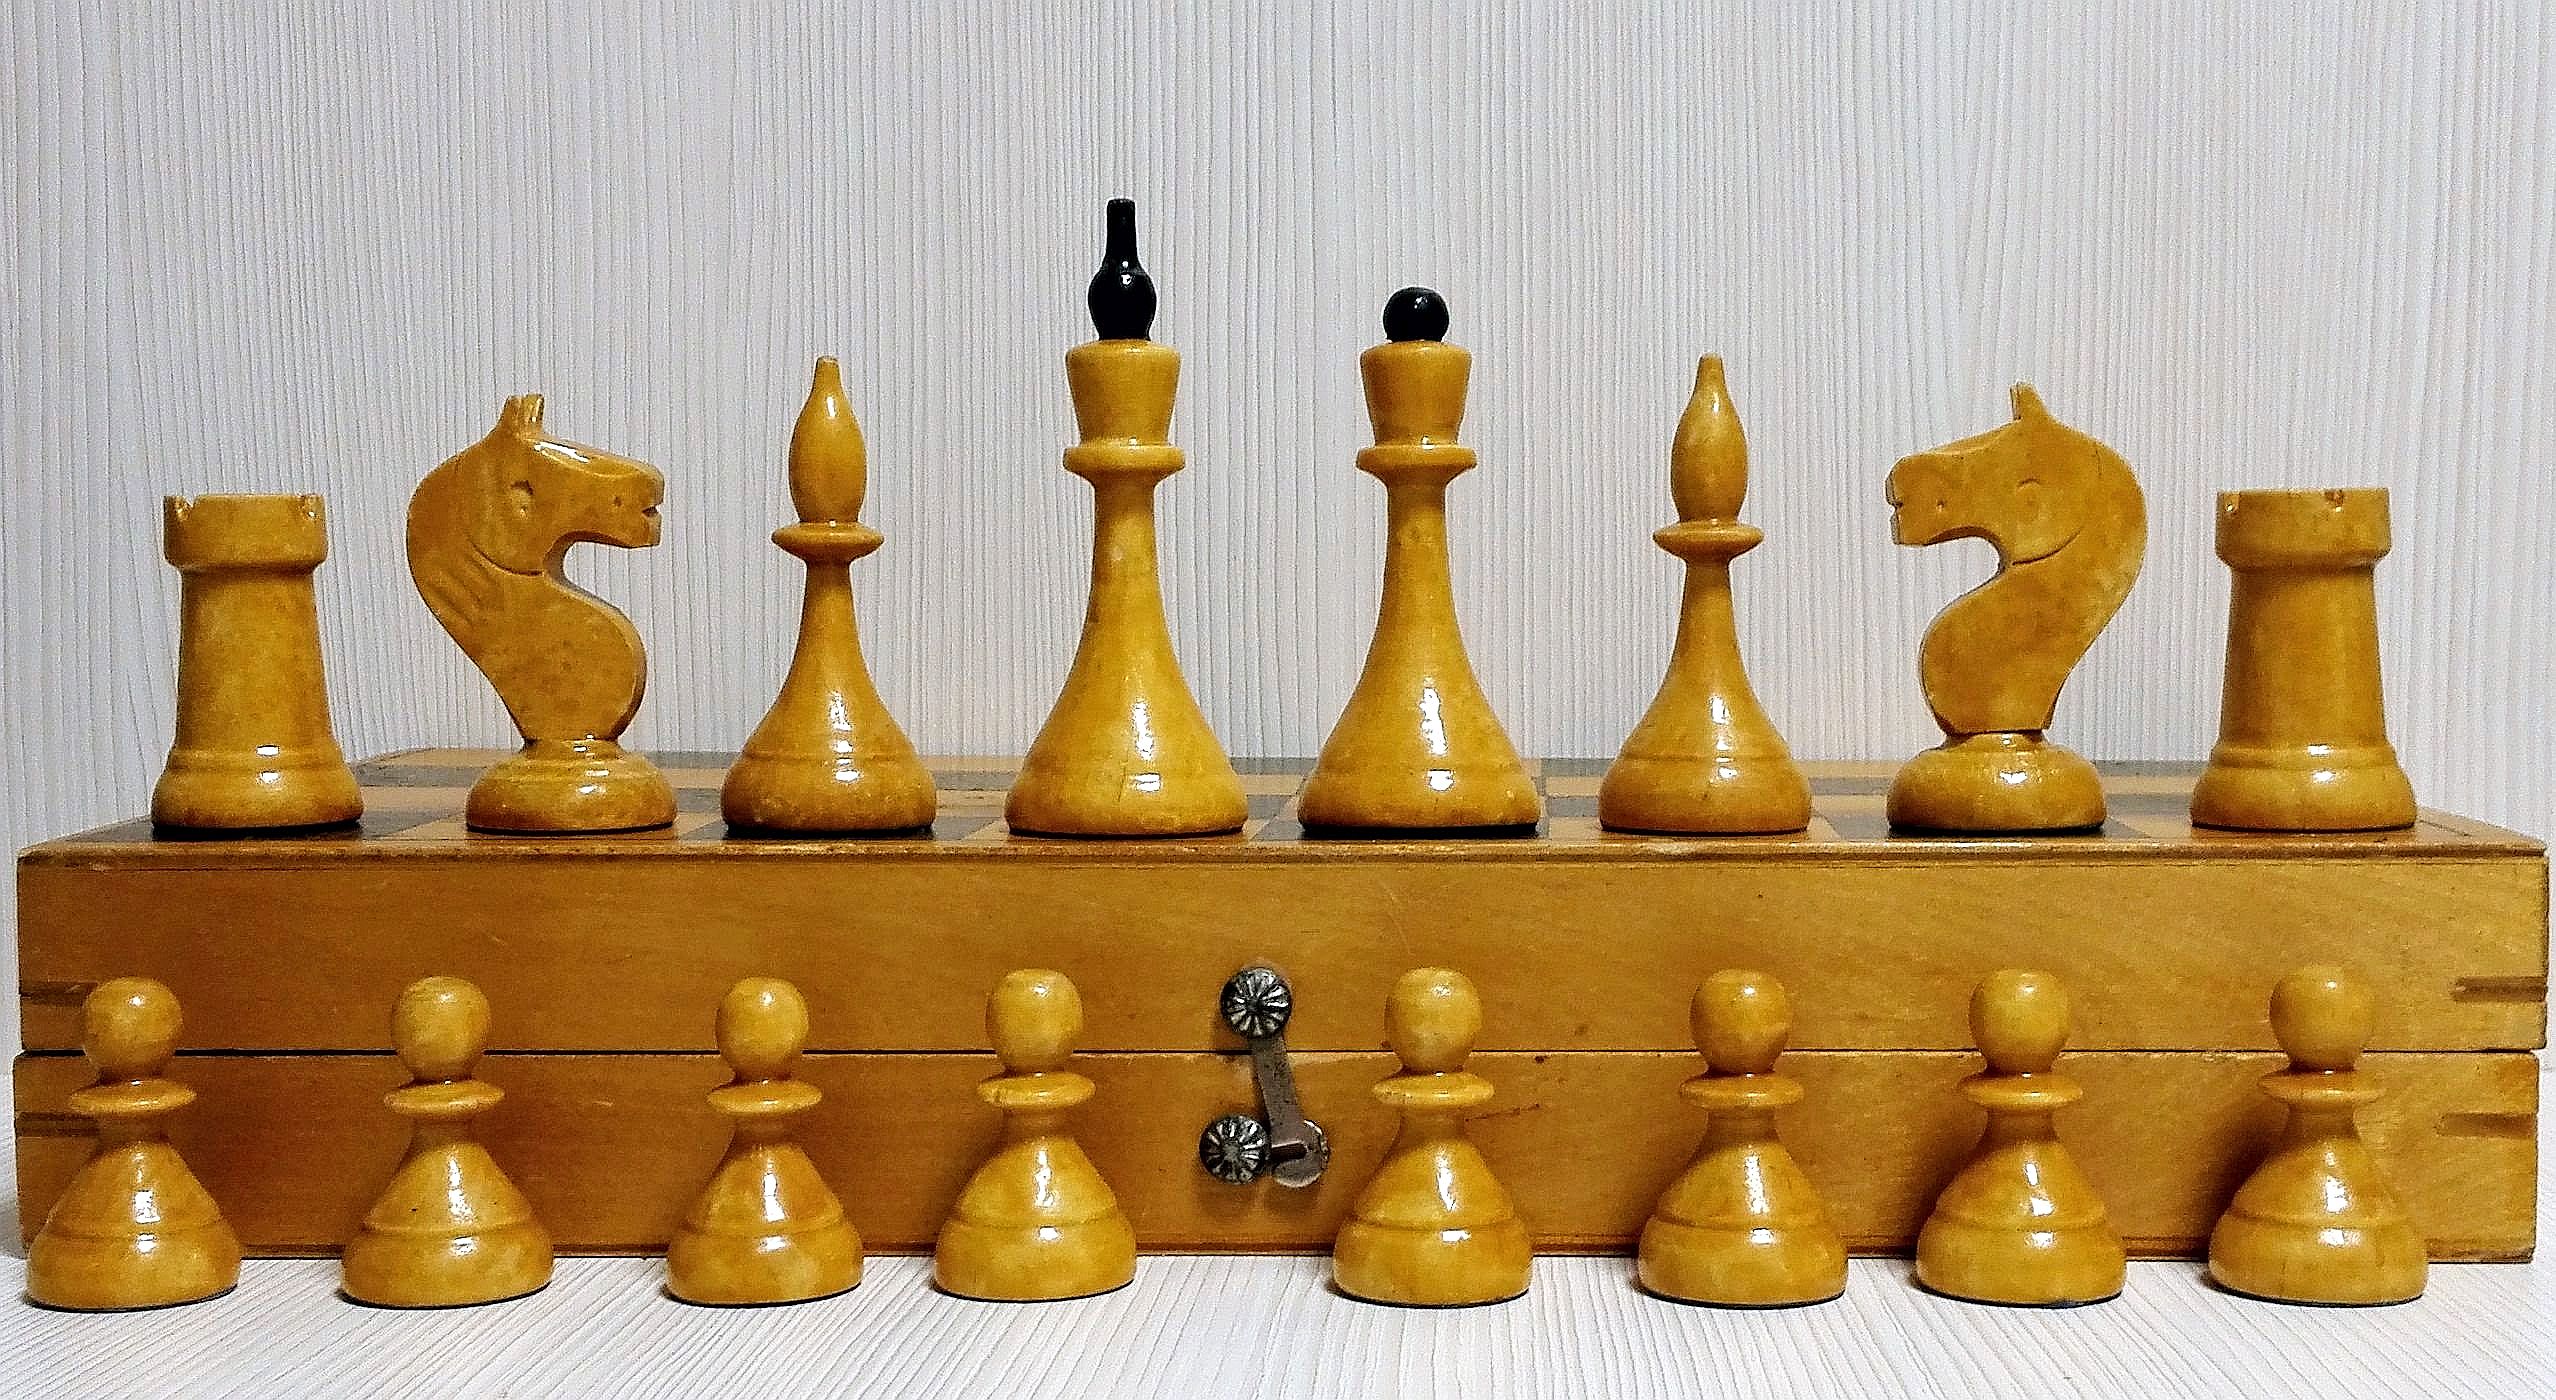 Vintage wooden chess set with queen gambit opening, close-up view